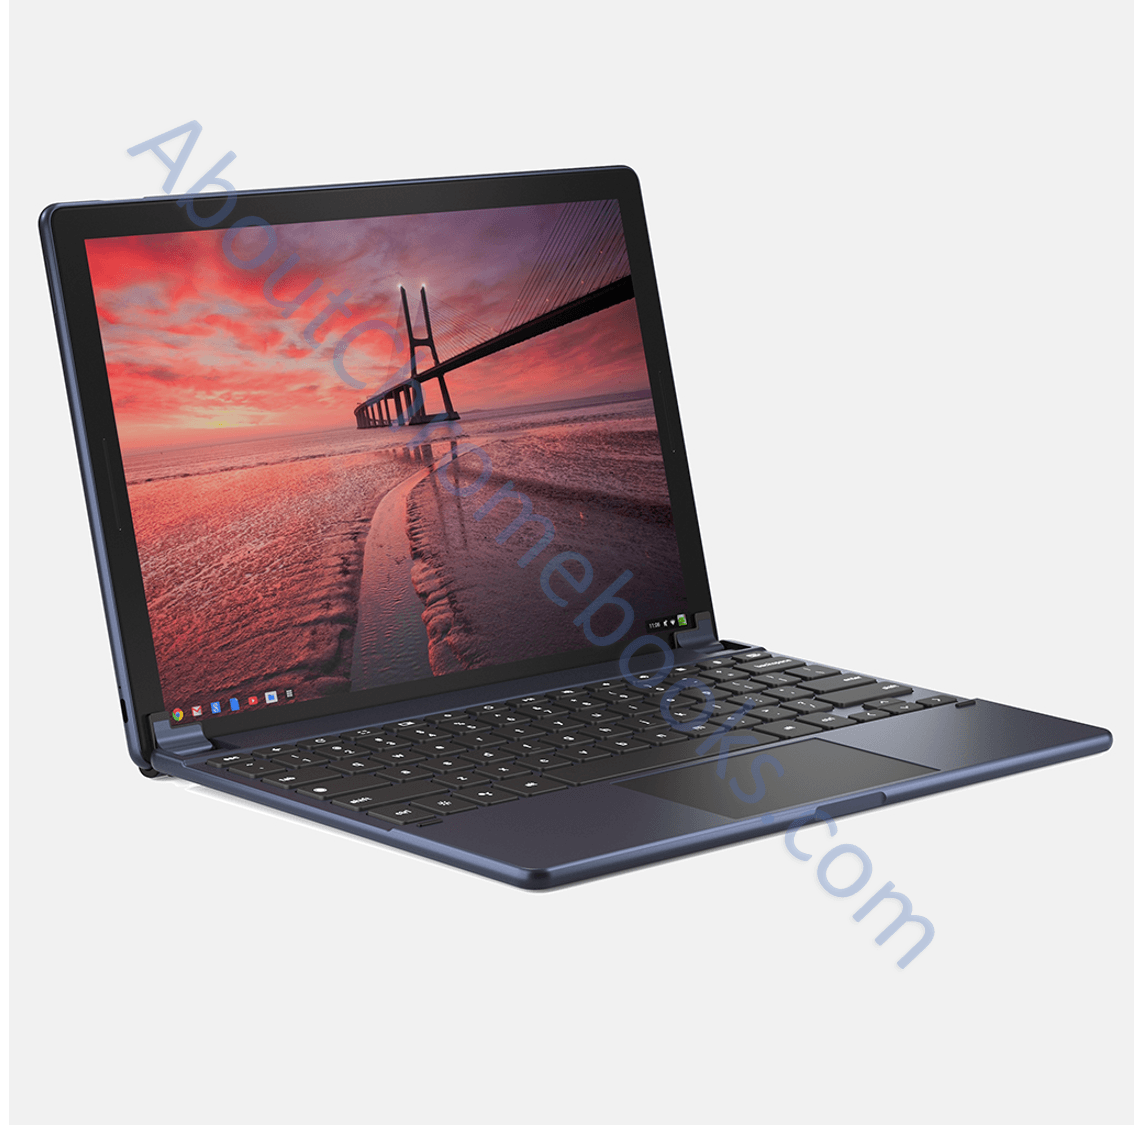 First look at what appears to be the Pixelbook tablet, aka: Nocturne